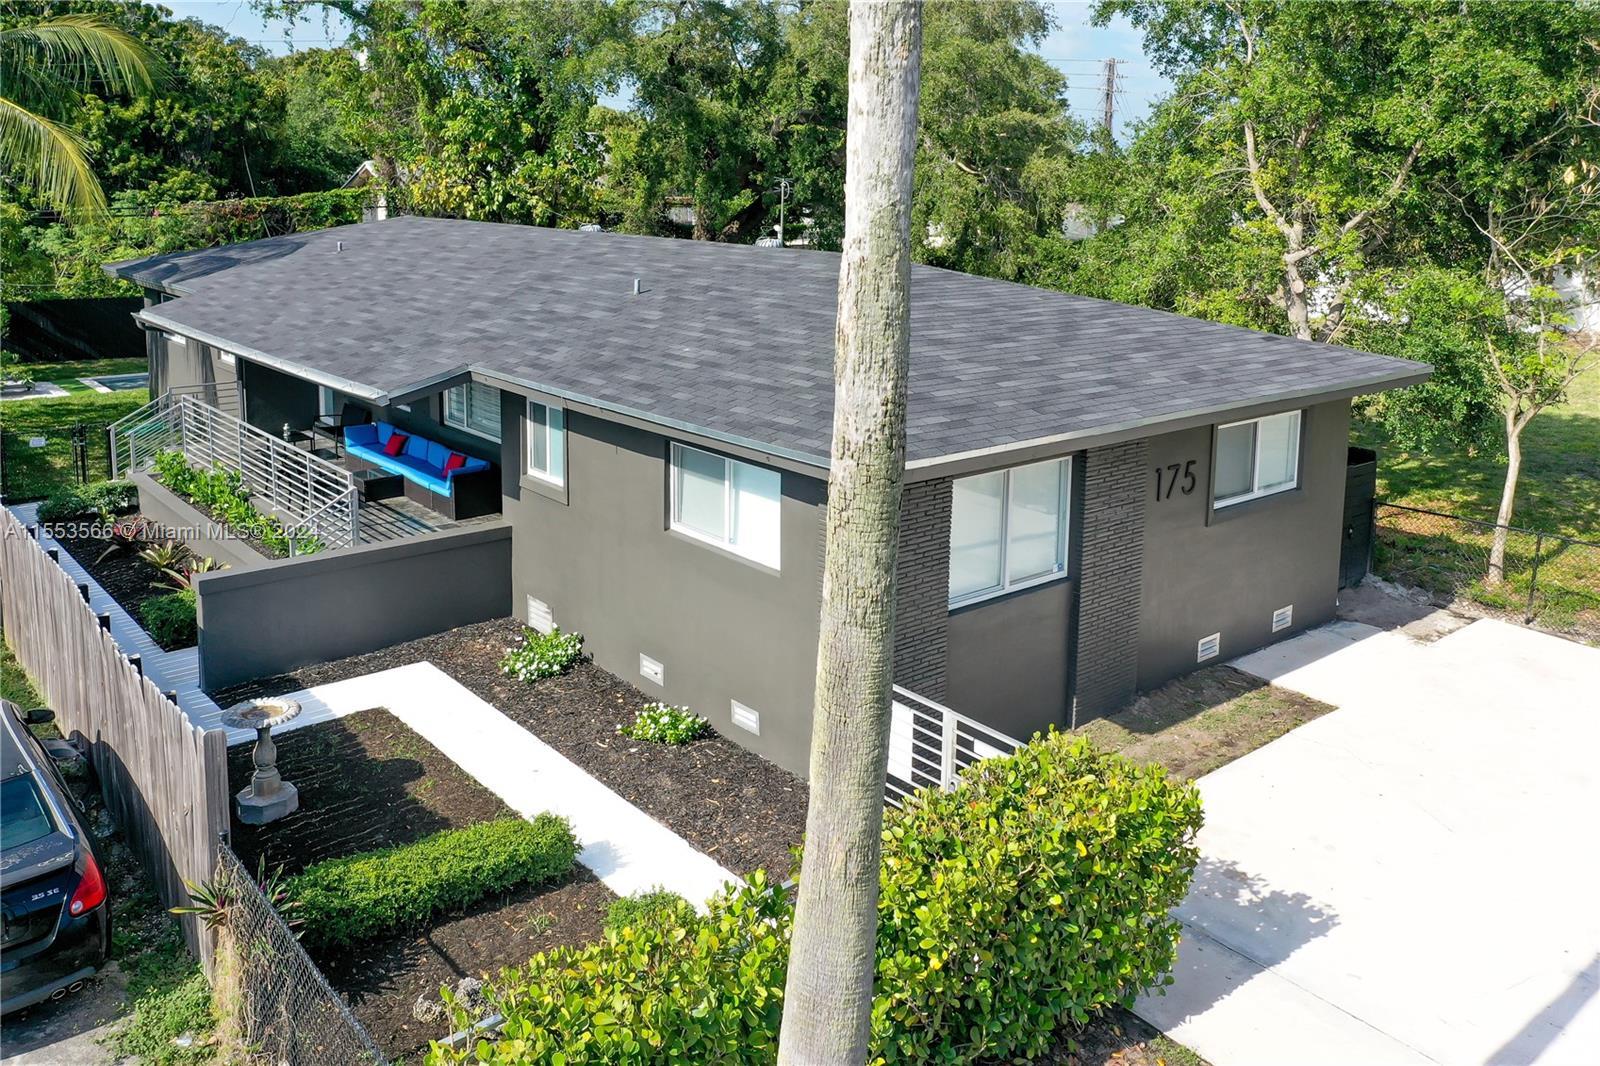 This fully remodeled 4-bedroom, 4-bathroom haven offers 2,078 sq.ft. of living space on a large 6,70